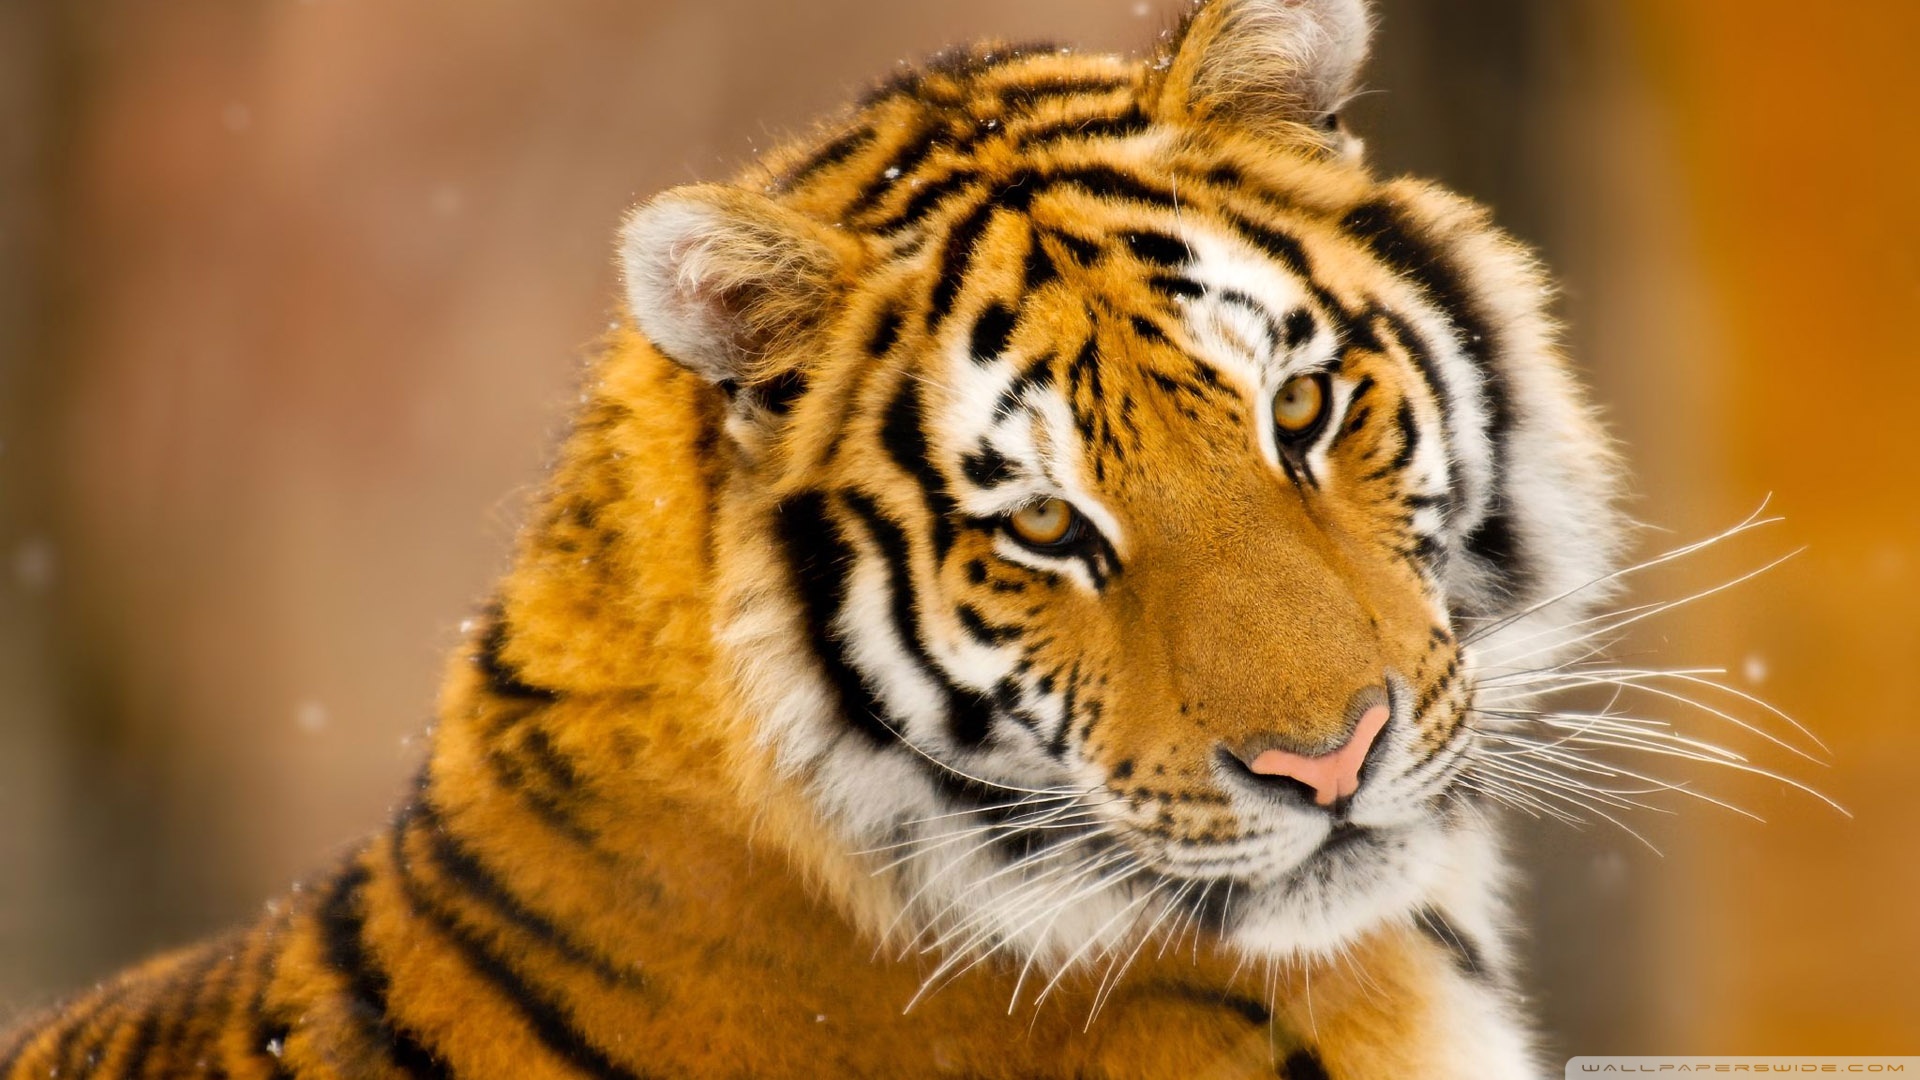 Tiger Widescreen HD Wallpapers | HD Wallpapers | ID #8754